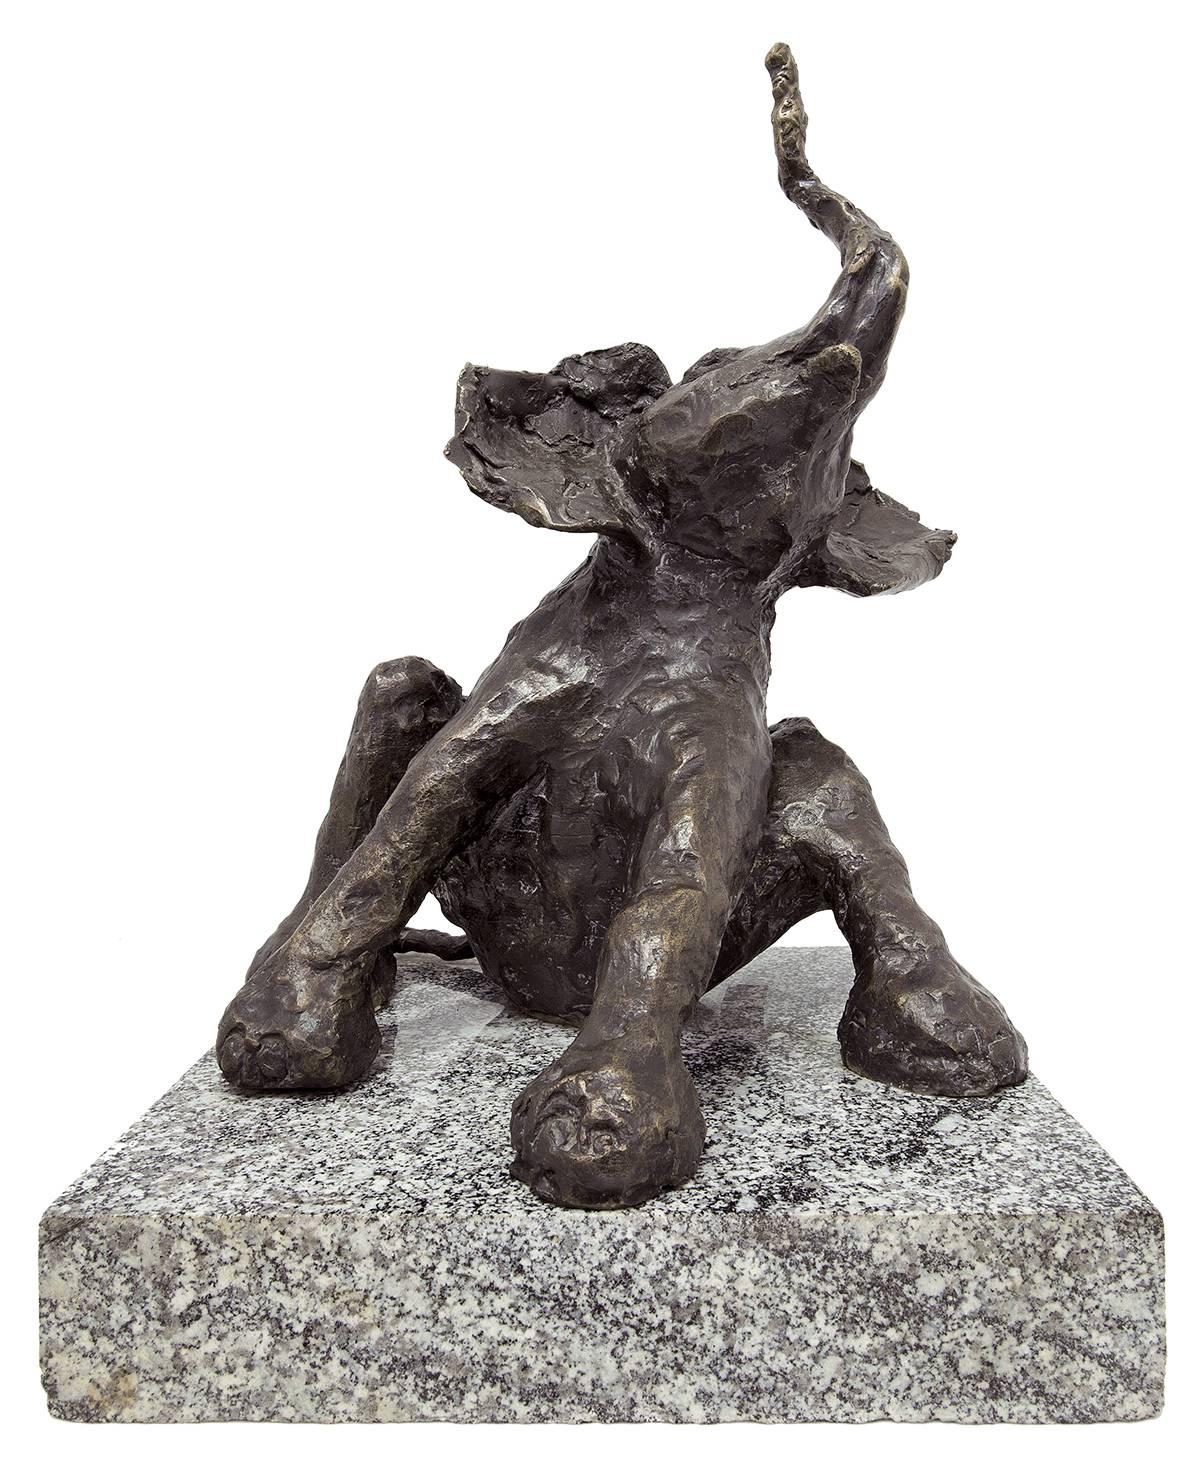 signed bronze from small edition of 8. marked 4/8

Dominik Albiński
(born 1975, South Africa)
He started carving at the age of twelve. When he was eighteen he went to Paris, where he studied at the prestigious Science Po. In 1997 he came to Poland